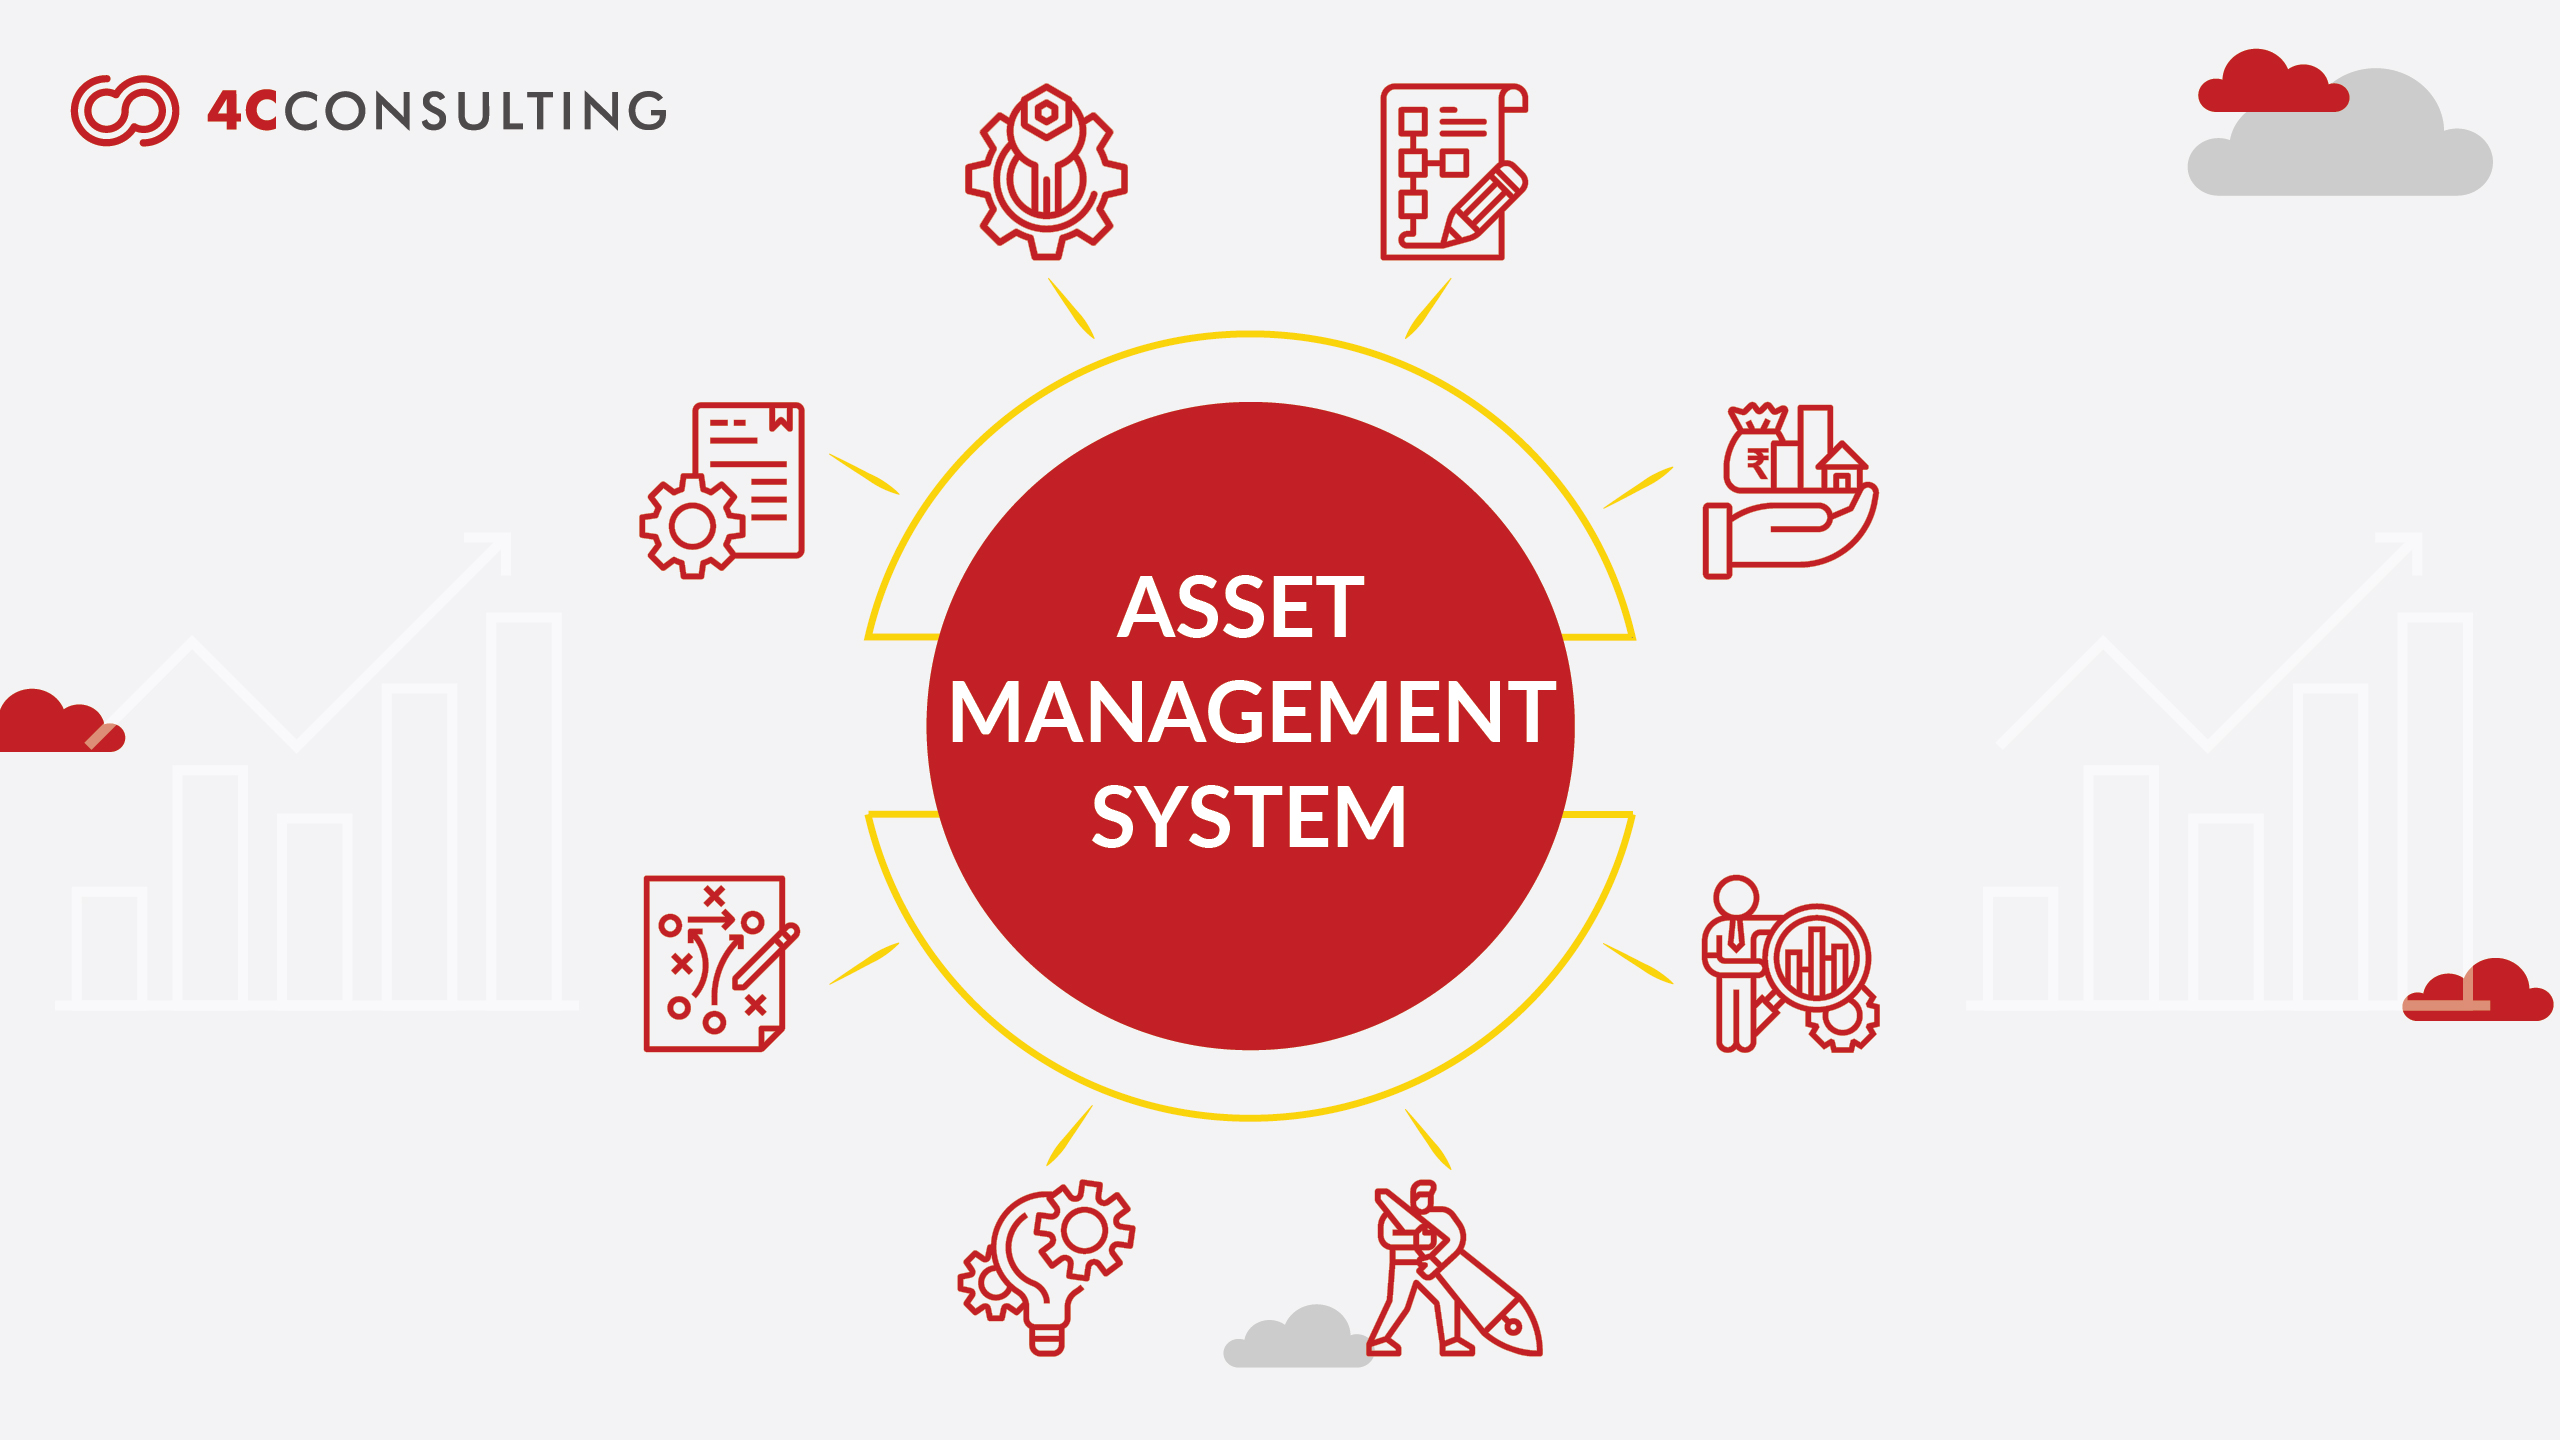 OPTIMIZING ASSET LIFECYCLE COSTS WITH ISO 55001